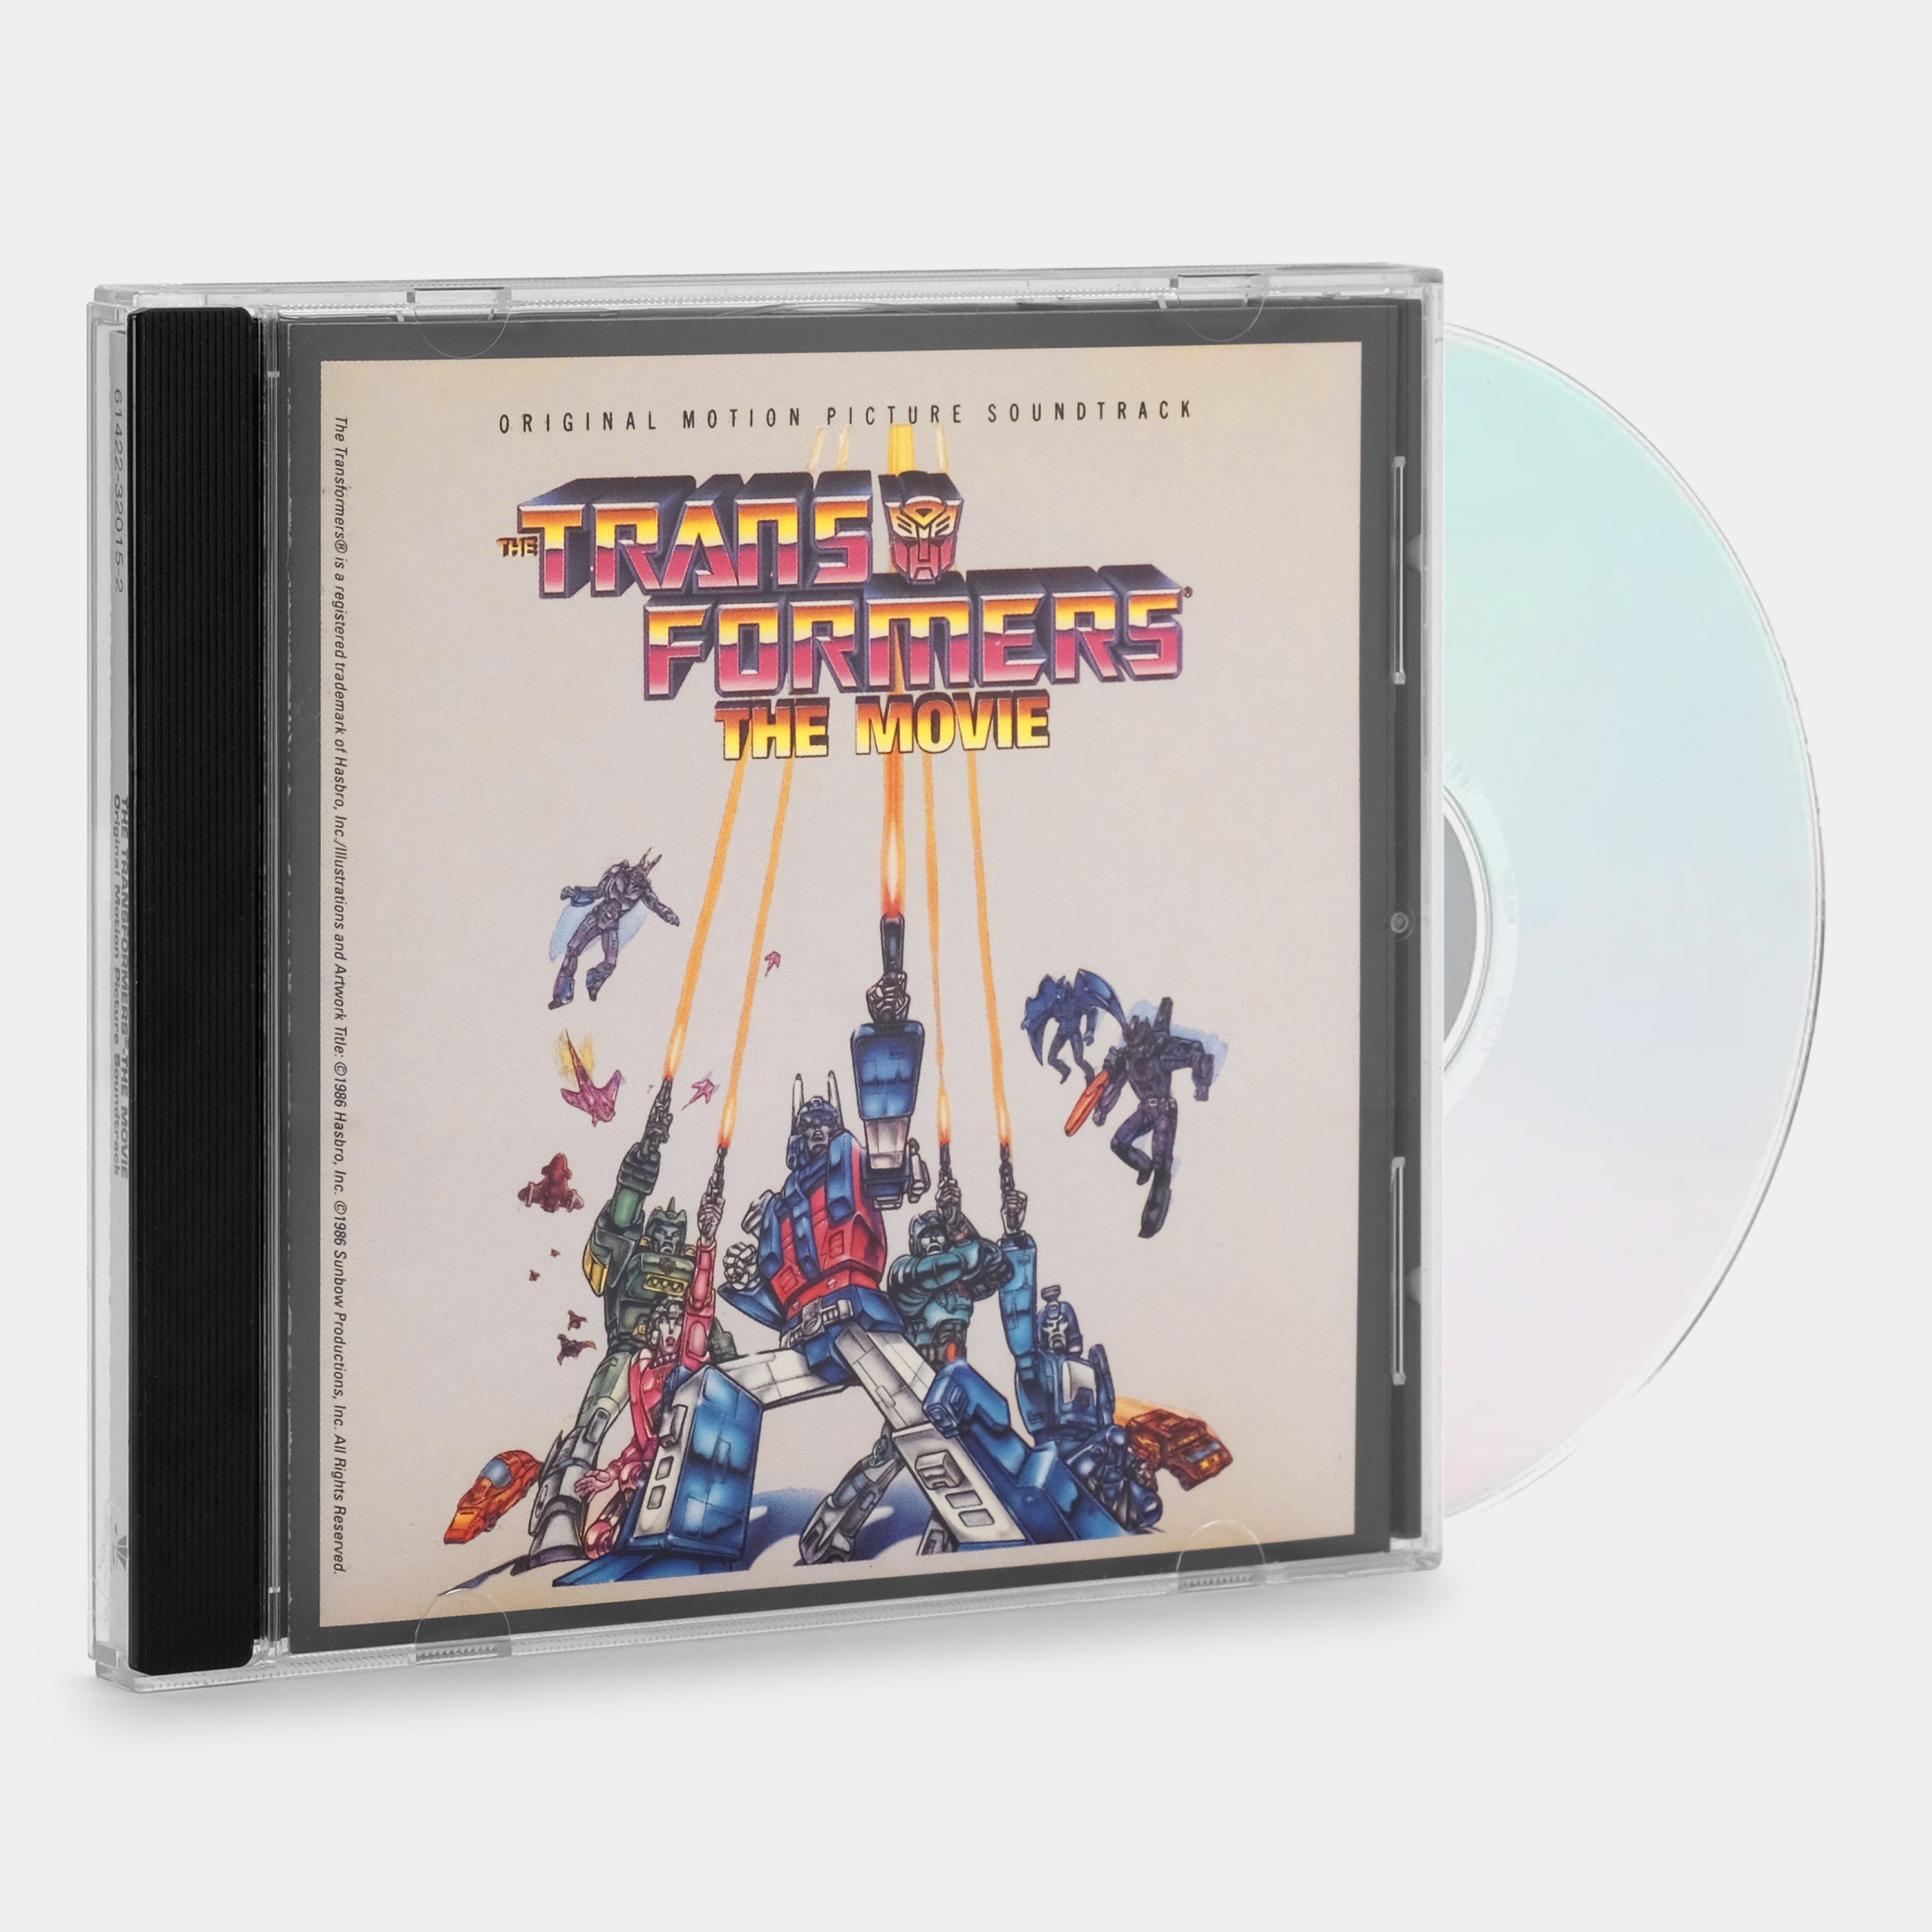 The Transformers: The Movie CD